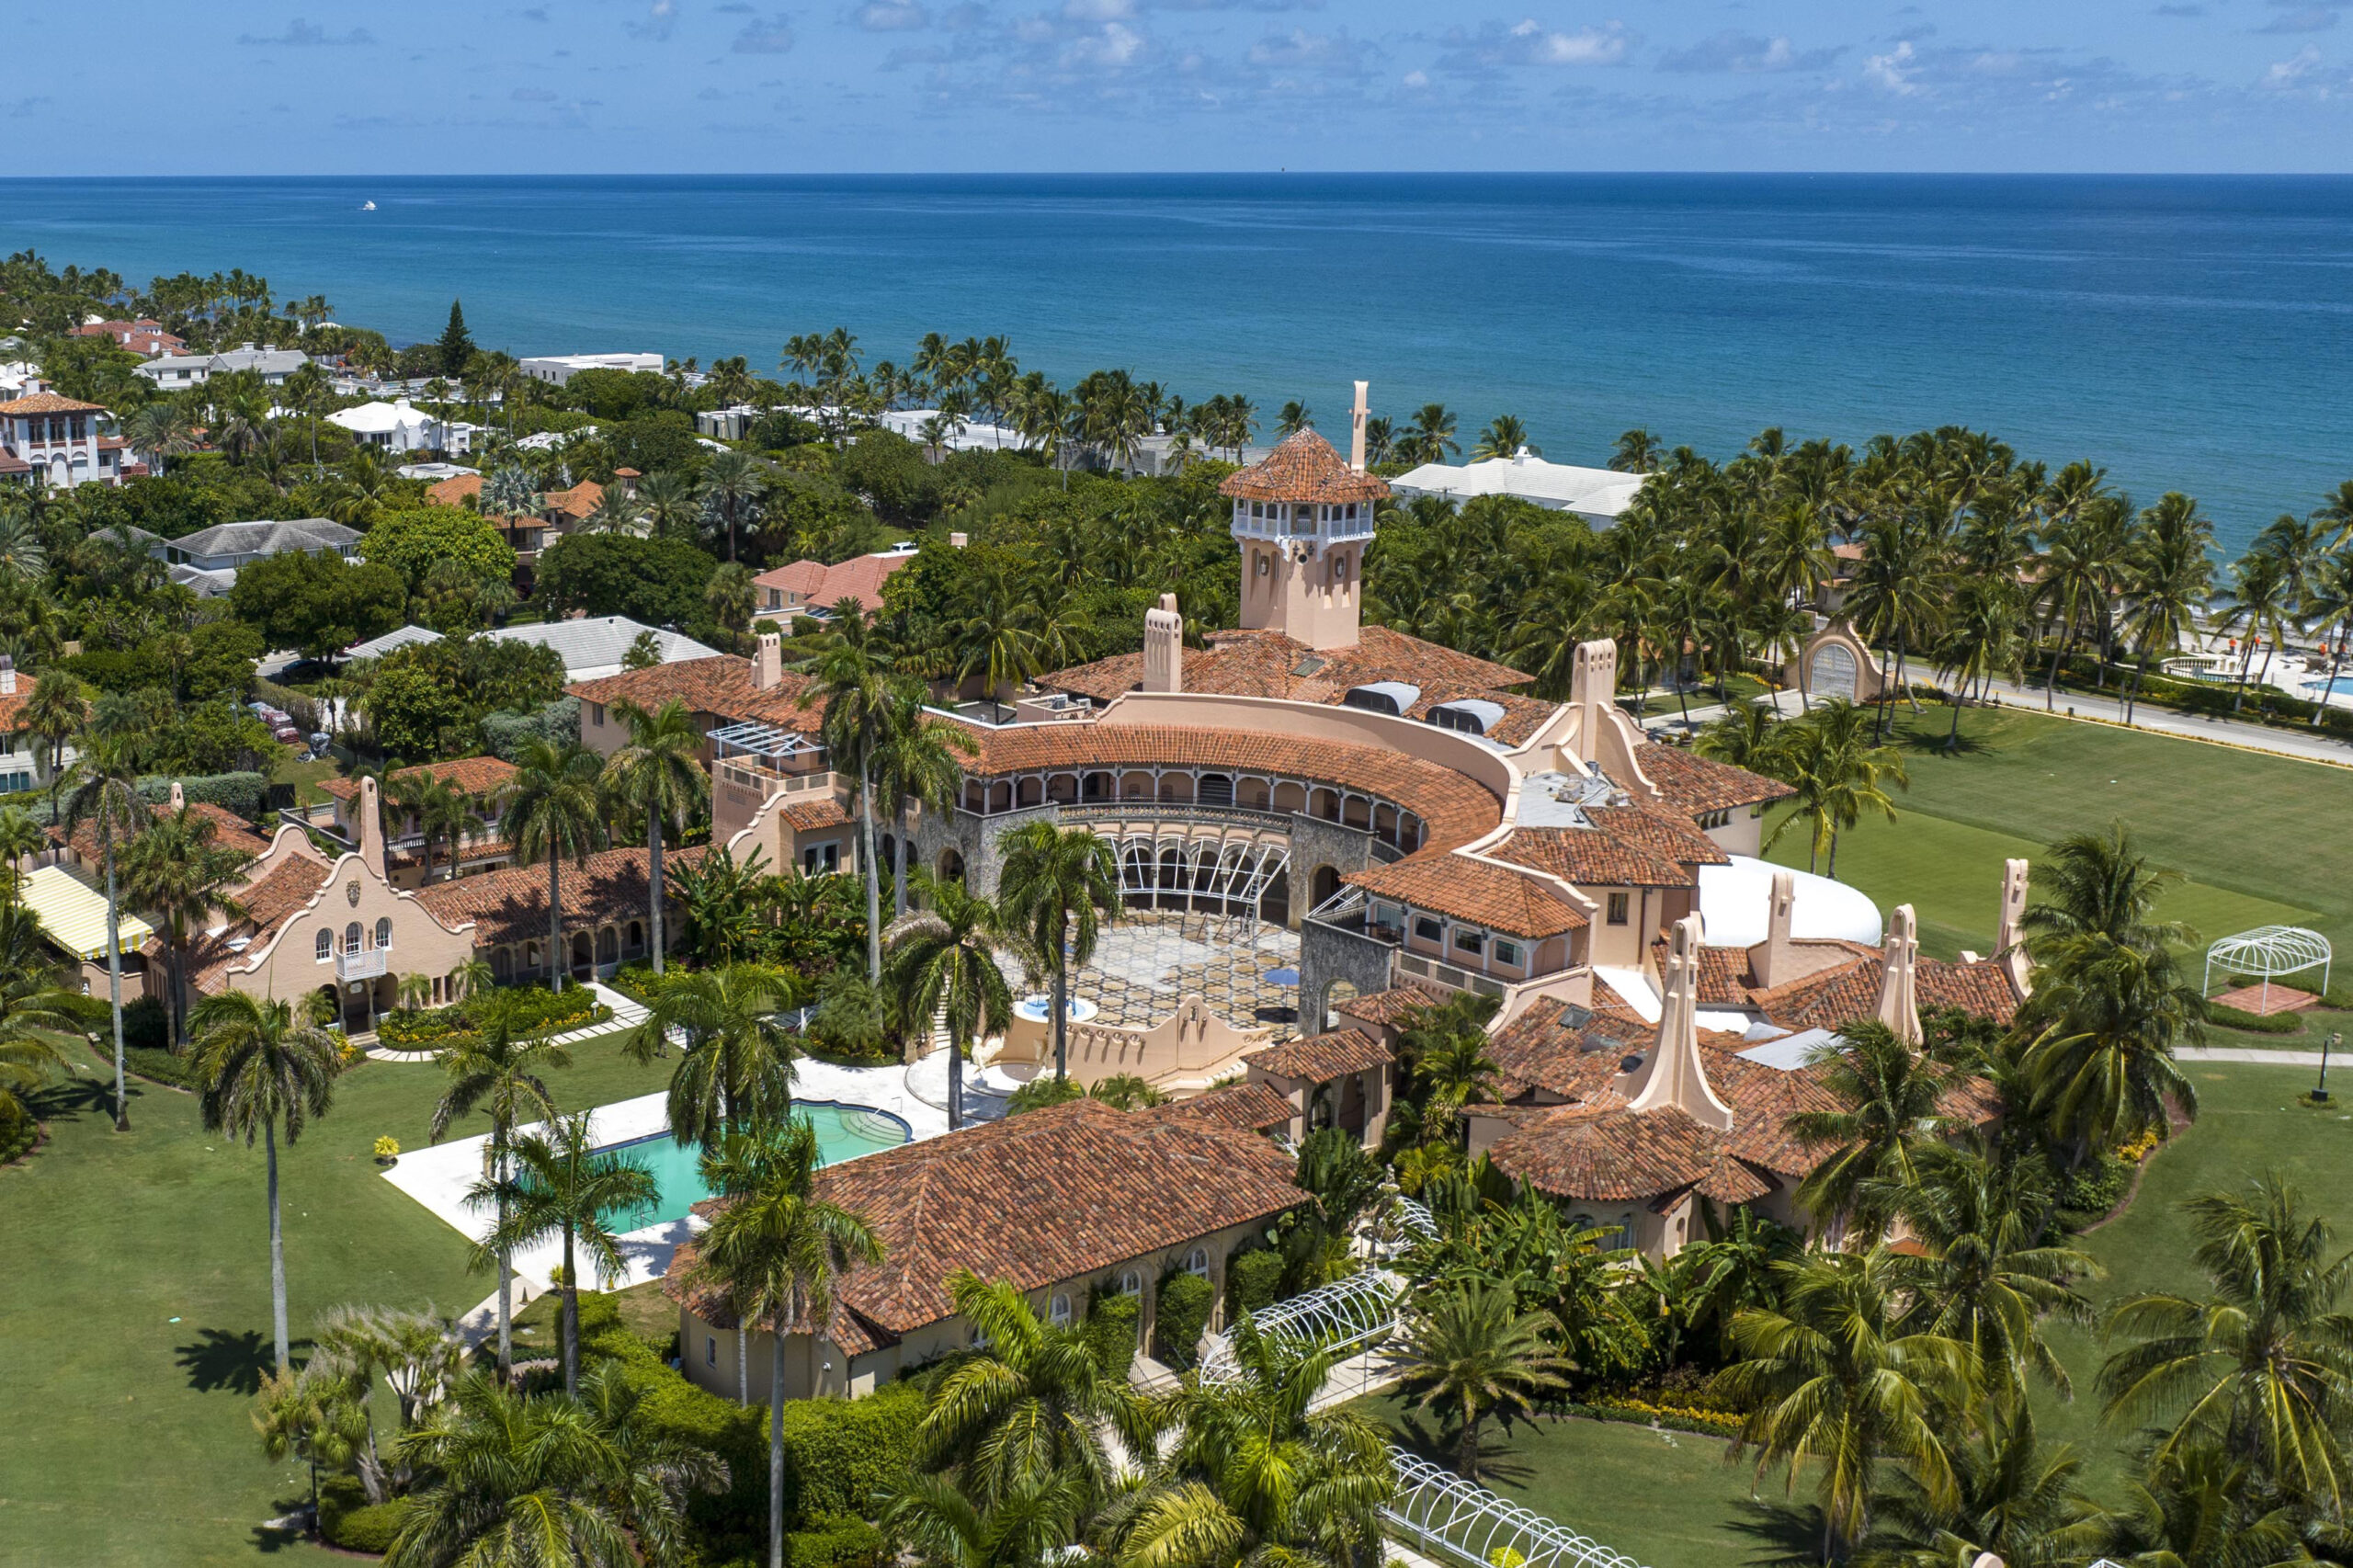 FILE - An aerial view of former President Donald Trump's Mar-a-Lago club in Palm Beach, Fla., on Aug. 31, 2022. A federal judge has appointed Raymond Dearie, a veteran New York jurist to serve as an independent arbiter and review records seized during an FBI search of former President Donald Trump's home last month. (AP Photo/Steve Helber, File)